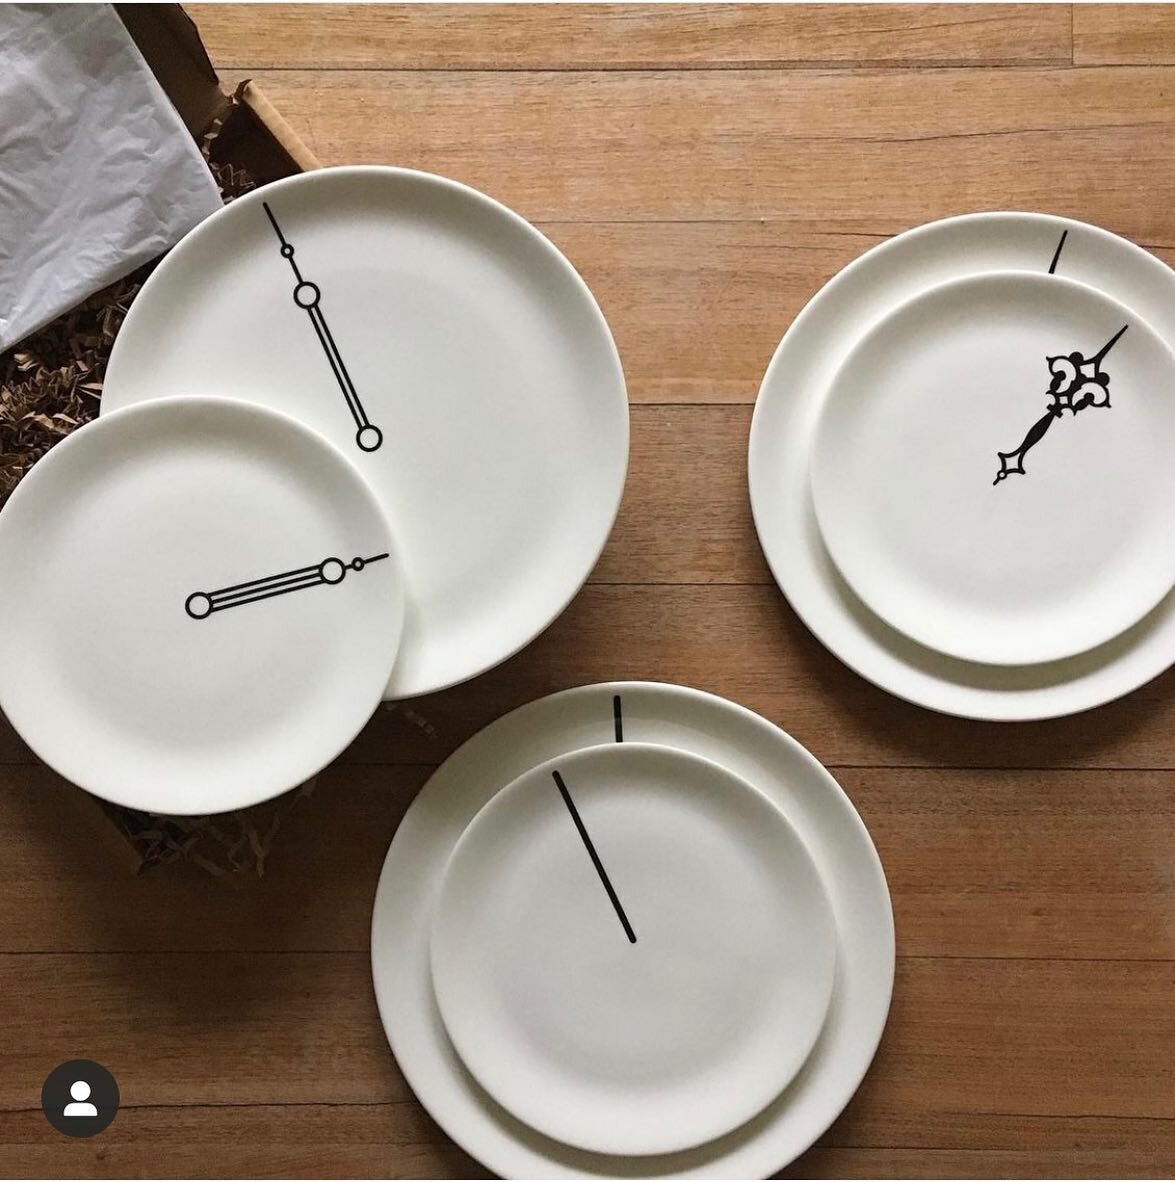 Repost/ These Dinner time plates made it all the way to Berlin! @hofmanninga #ceramics #monochrome #plates